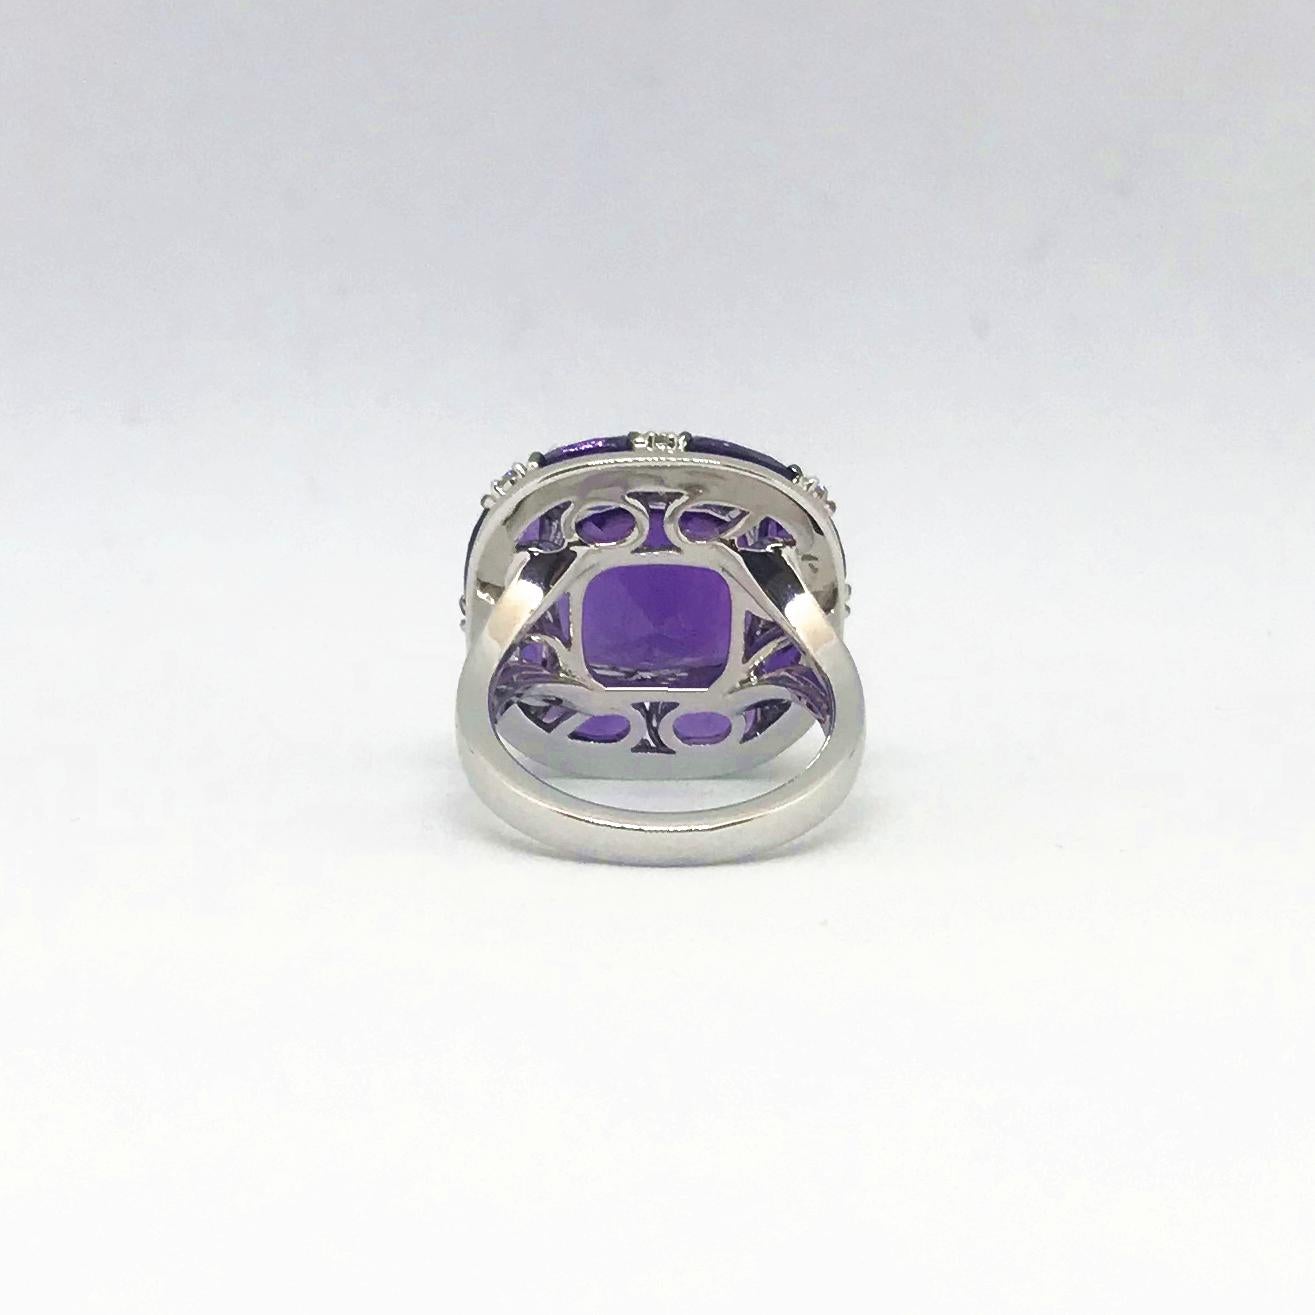 Women's White Gold Faceted and Cabochon-Cut Amethyst and Diamond Ring